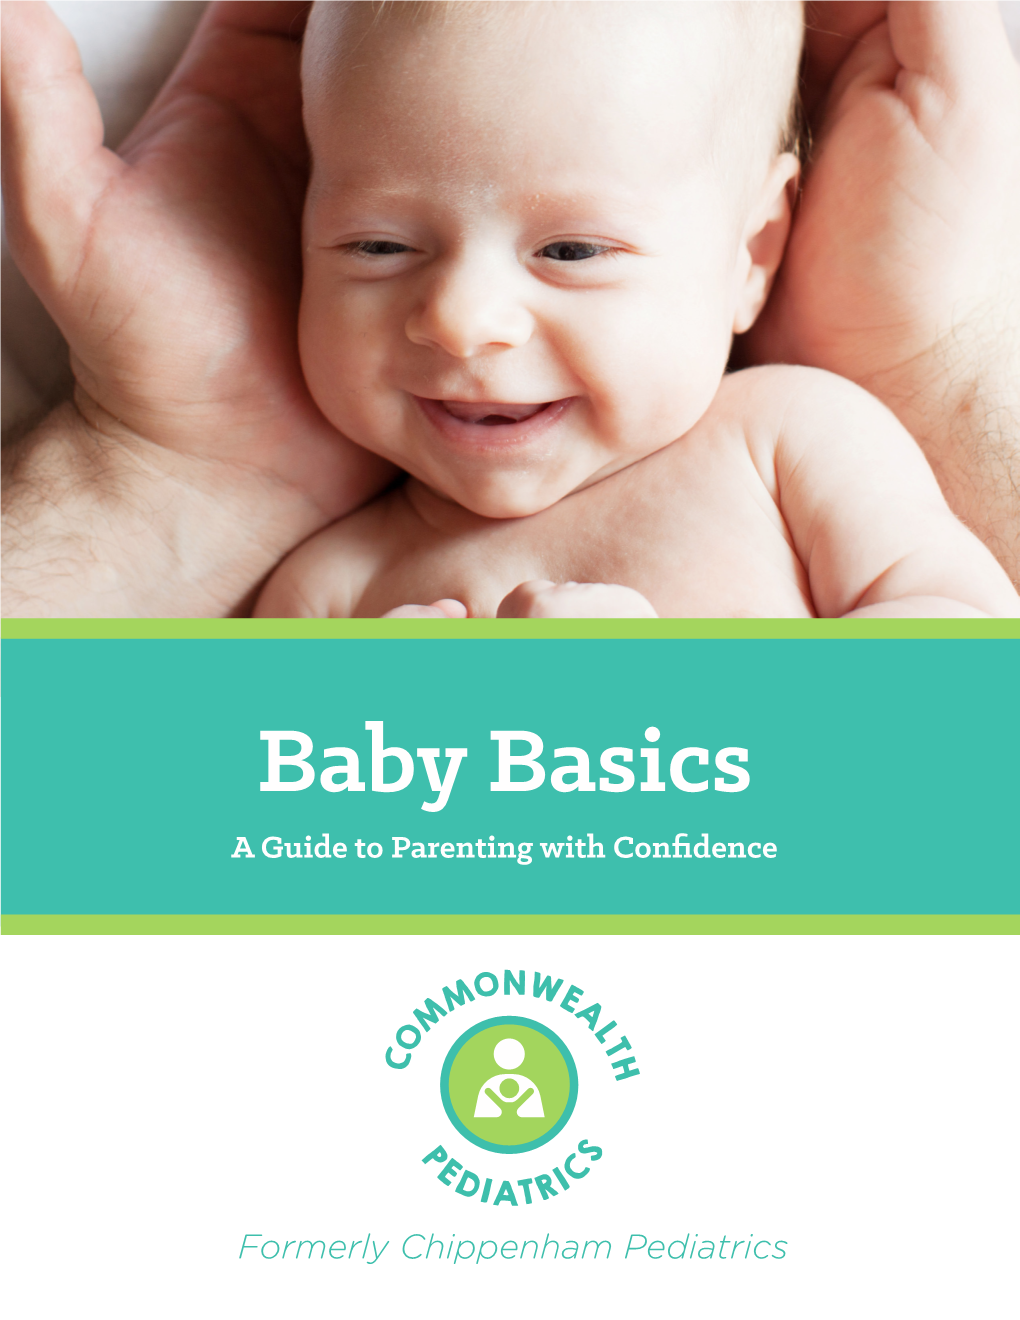 Baby Basics Horizontal Signature Lockup a Guide to Parenting with Confidence